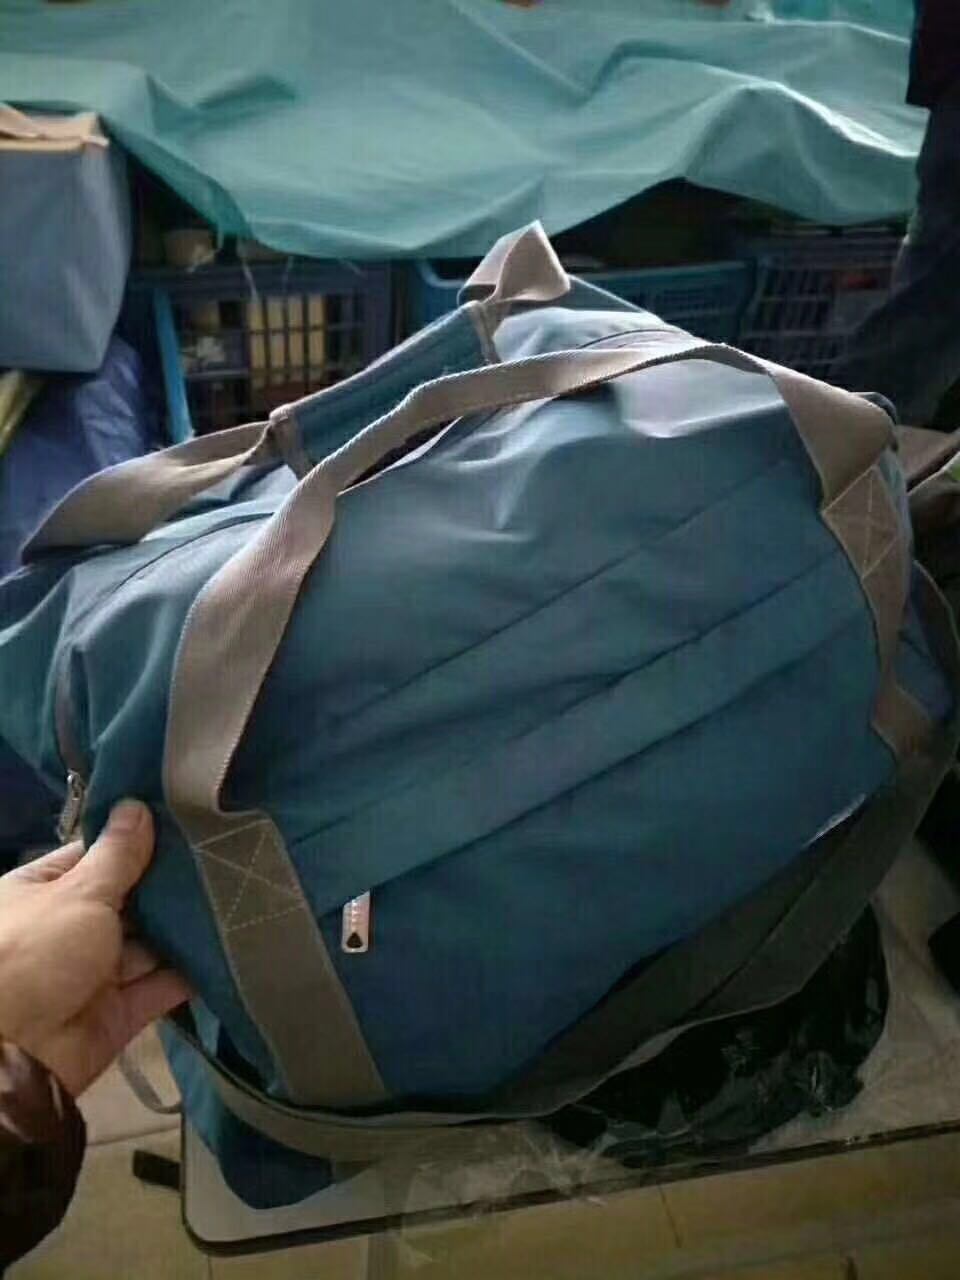 120000PCS for Backpack, Traveling Bags, Computer Bags...Kinds of Bags